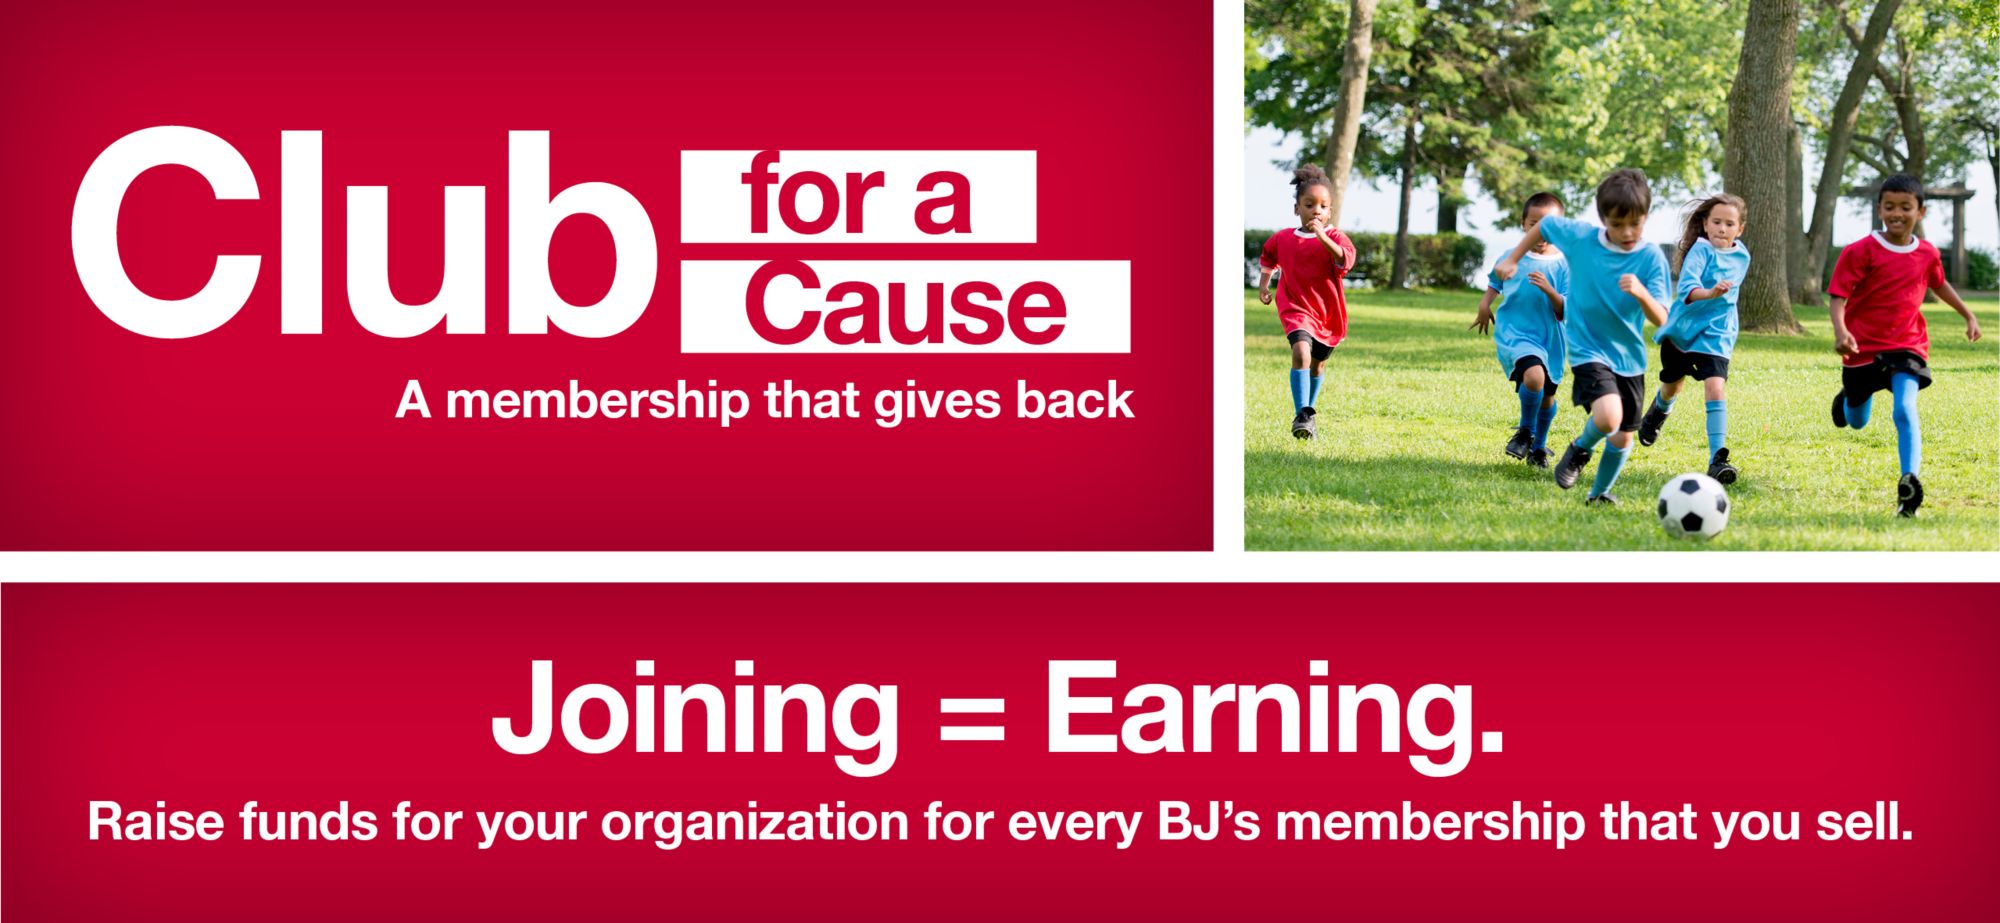 Club for a cause. A membership that gives back.